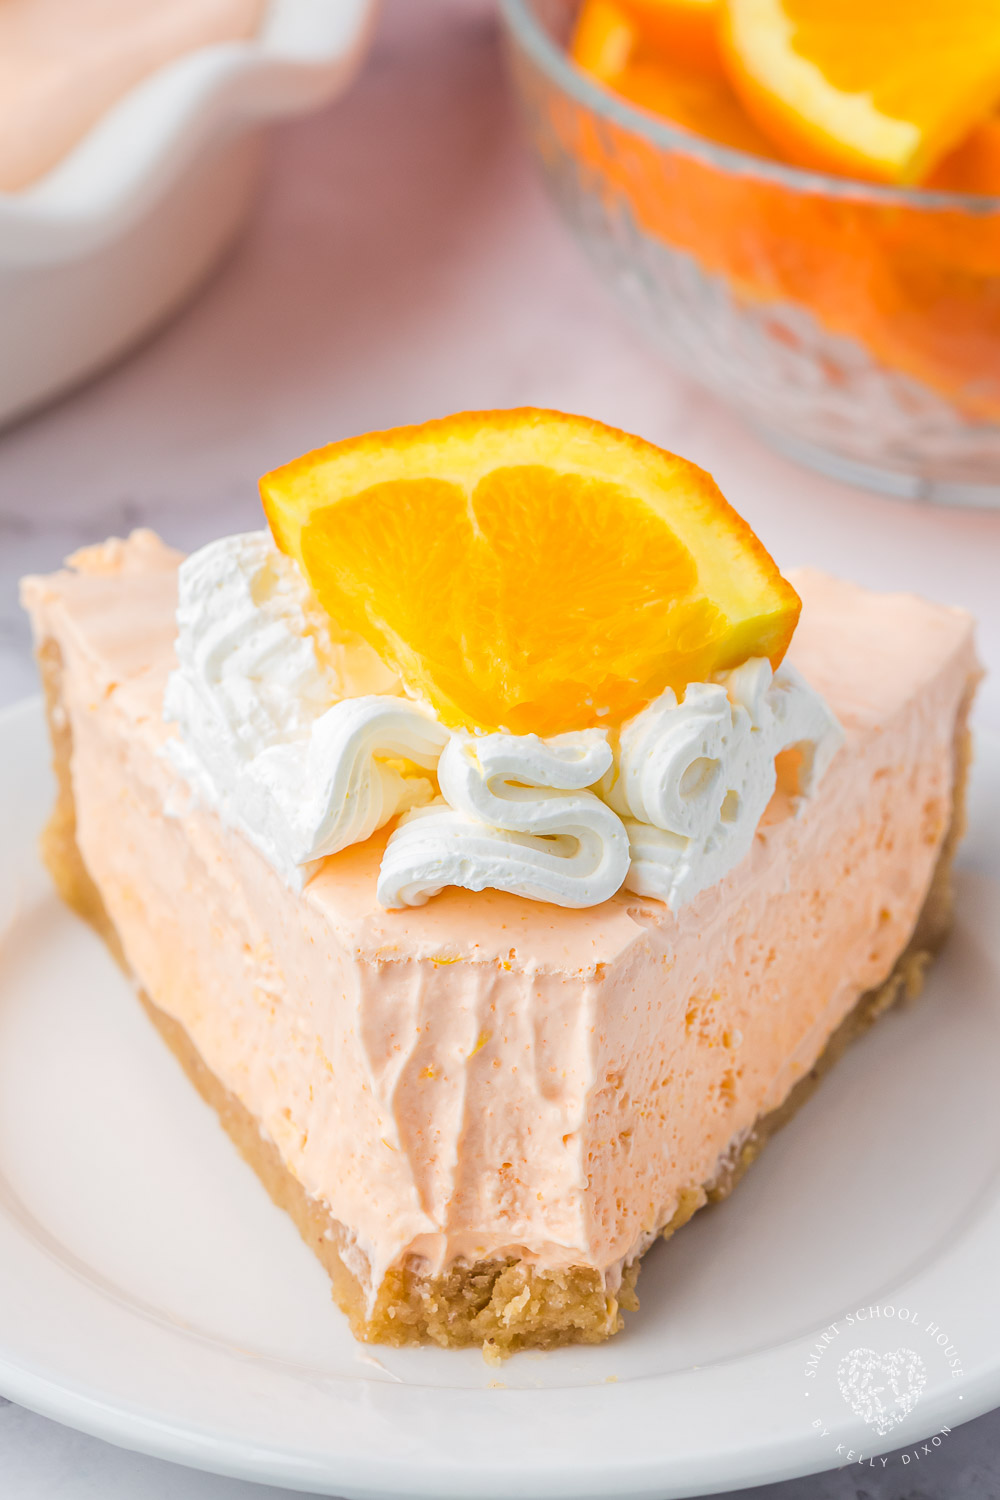 An Orange Jello Creamsicle Pie is an orange popsicle with an irresistible creaminess, all in a cookie pie crust. It screams hot summer days and ice cream trucks! 